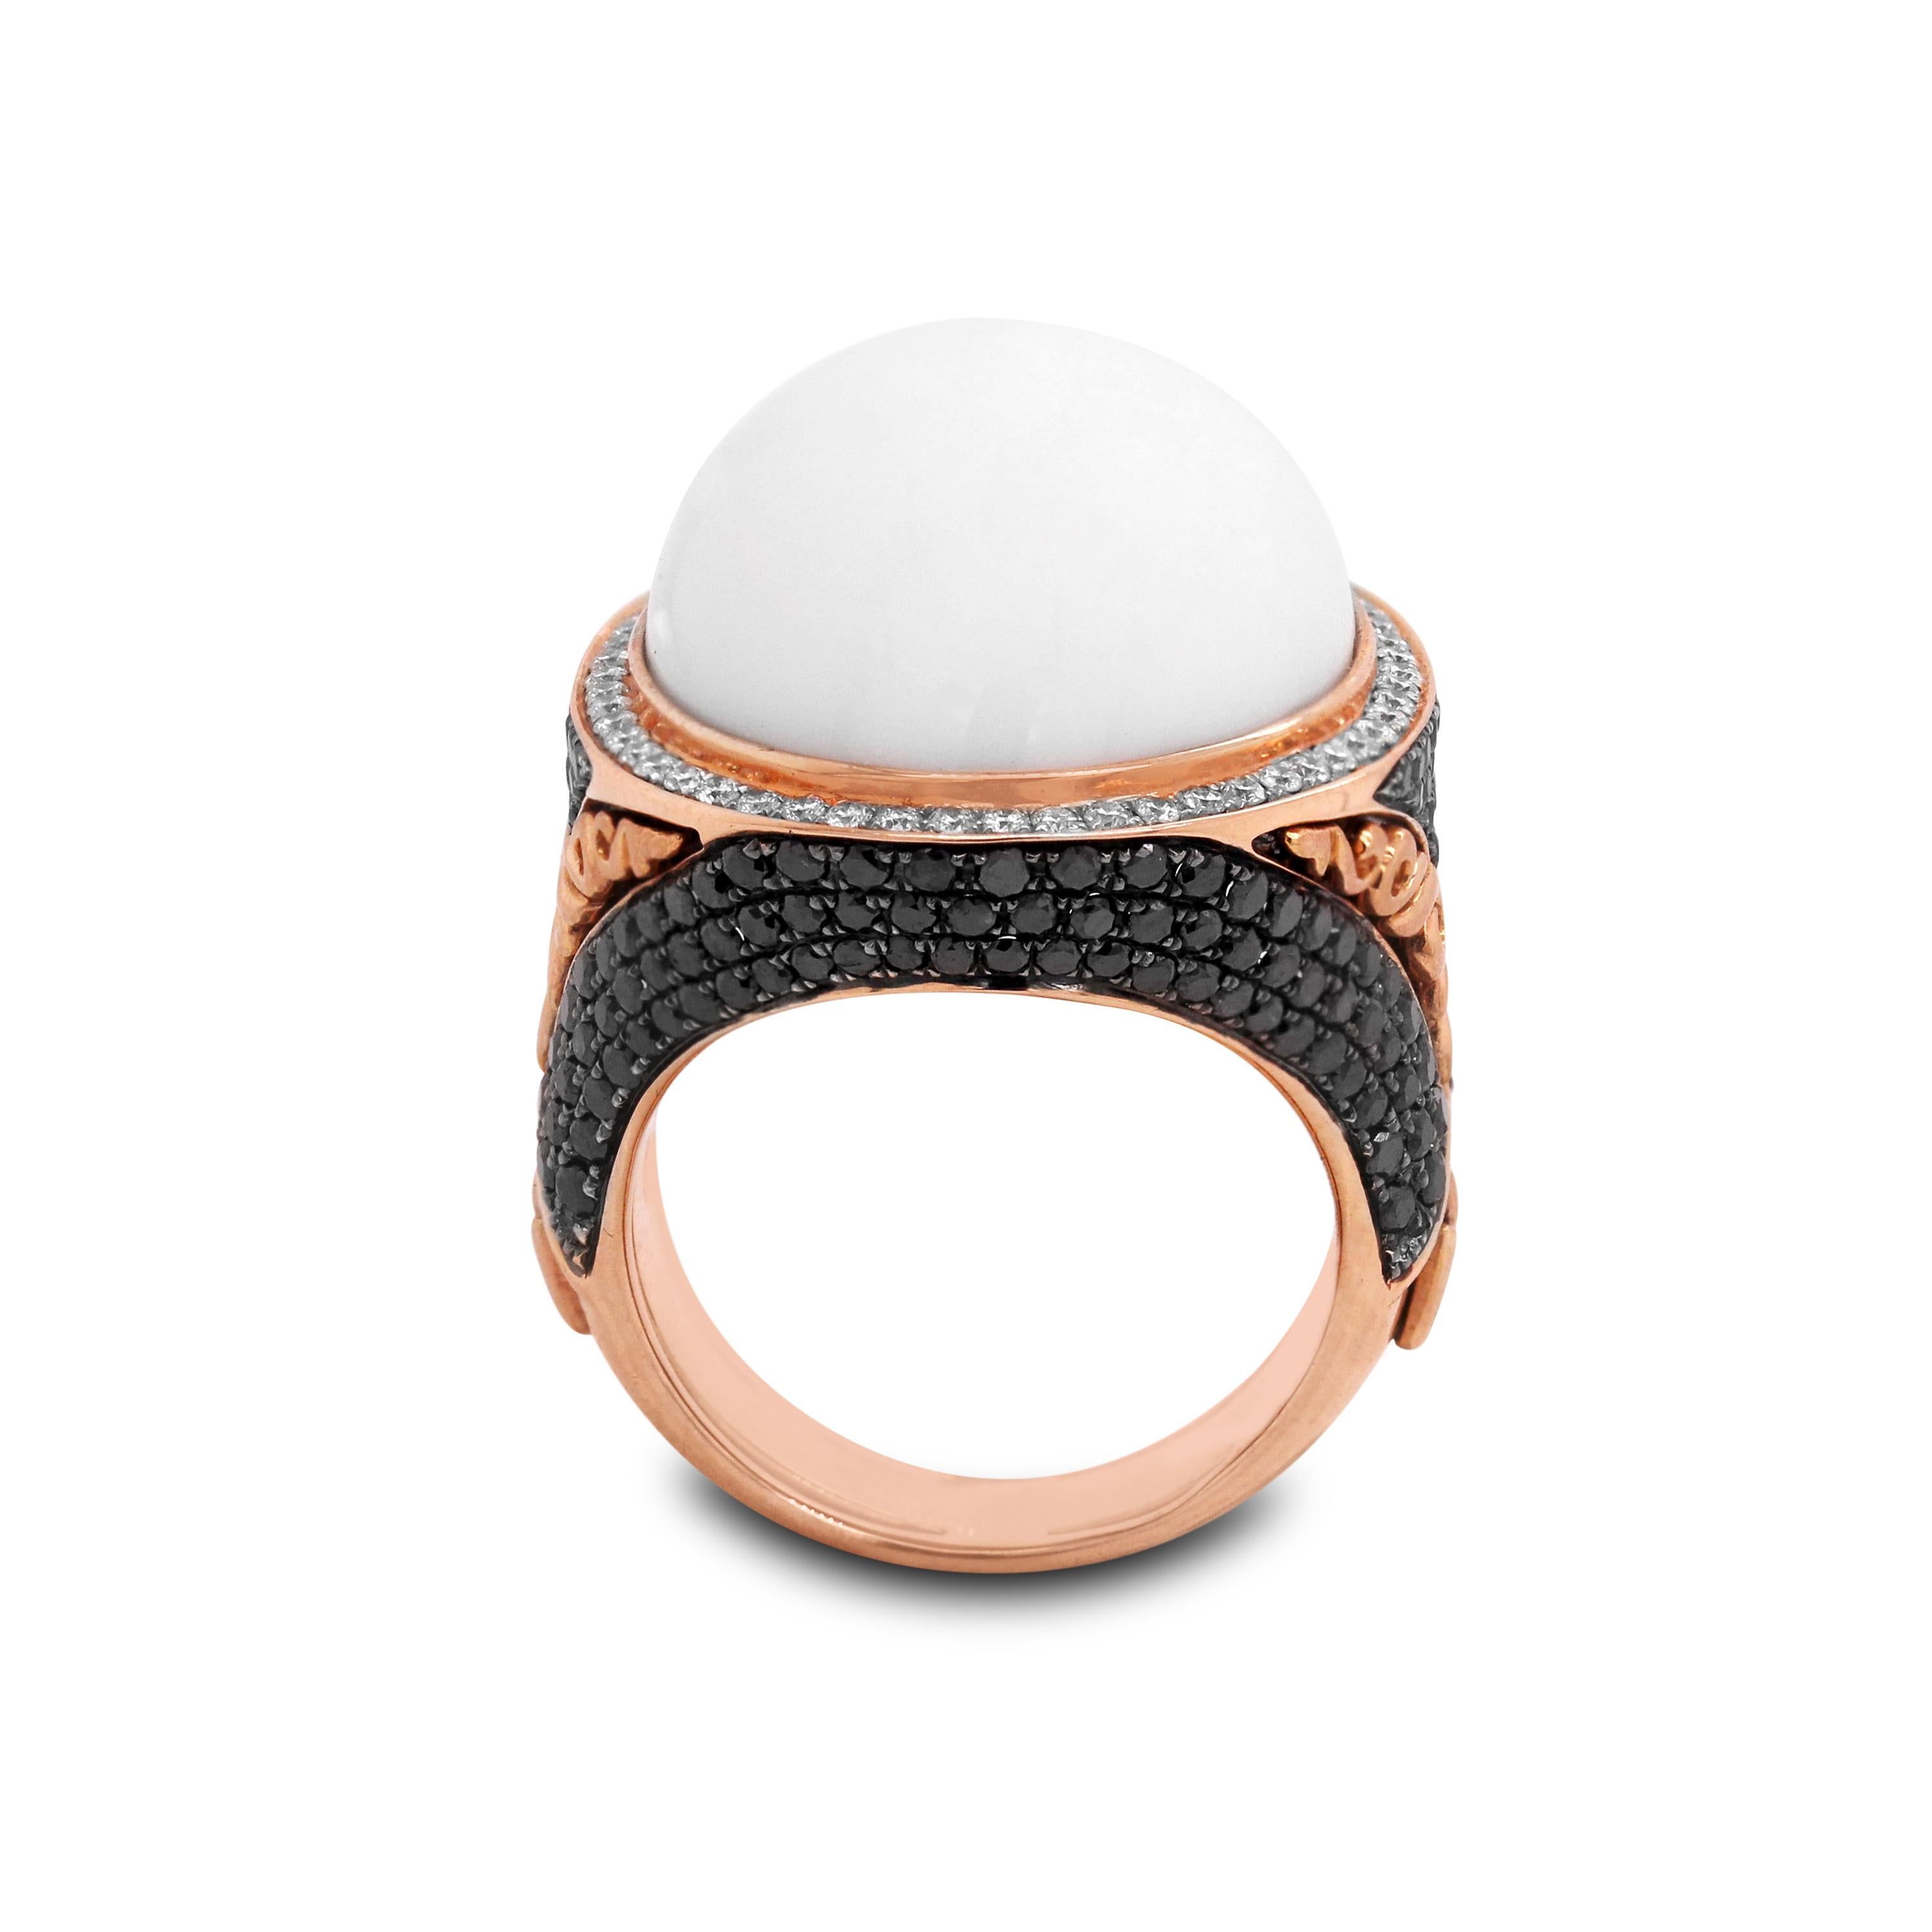 14K Rose Gold White and Black Diamond Ring with White Agate Center

2.22 carat diamonds total weight. Black diamonds are set throughout the ring with white diamonds set surrounding the center White Agate.

Ring face is 1.05 inch by 0.90 inch. 0.40